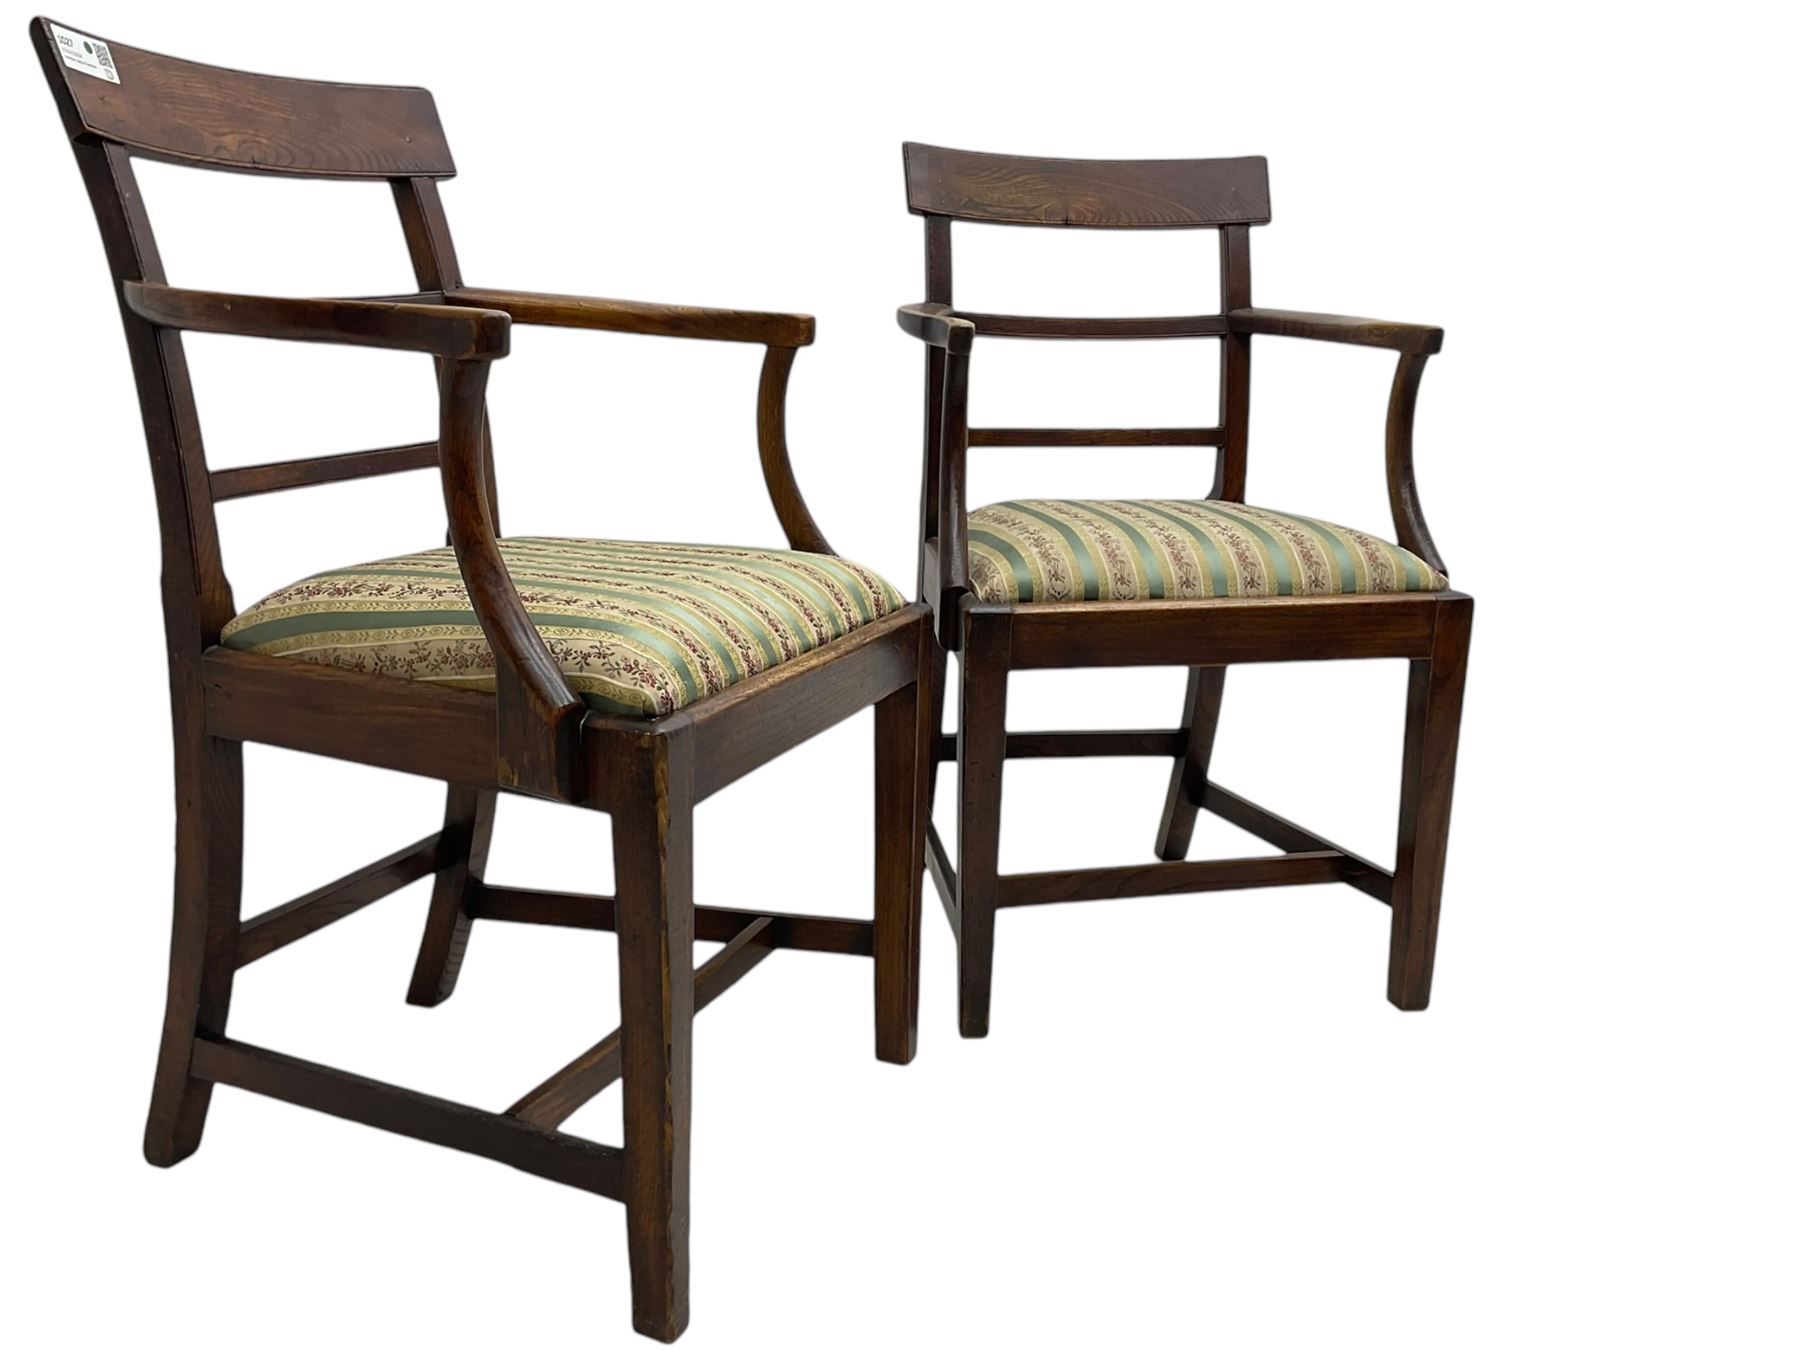 Pair of 19th century elm elbow chairs - Image 4 of 7